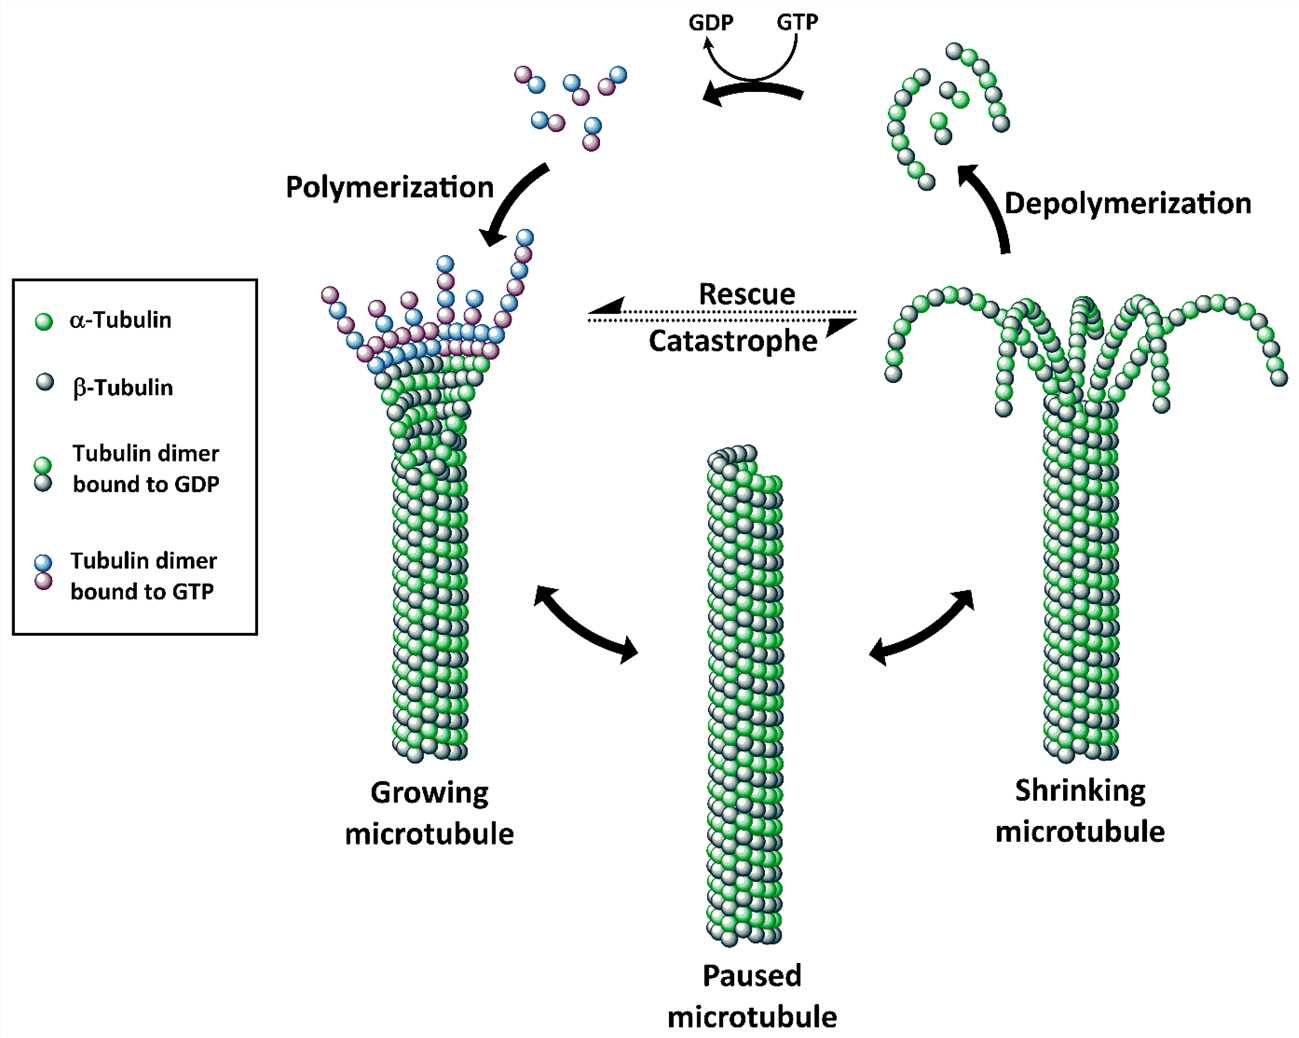 The structure, polymerization and depolymerization of microtubules.